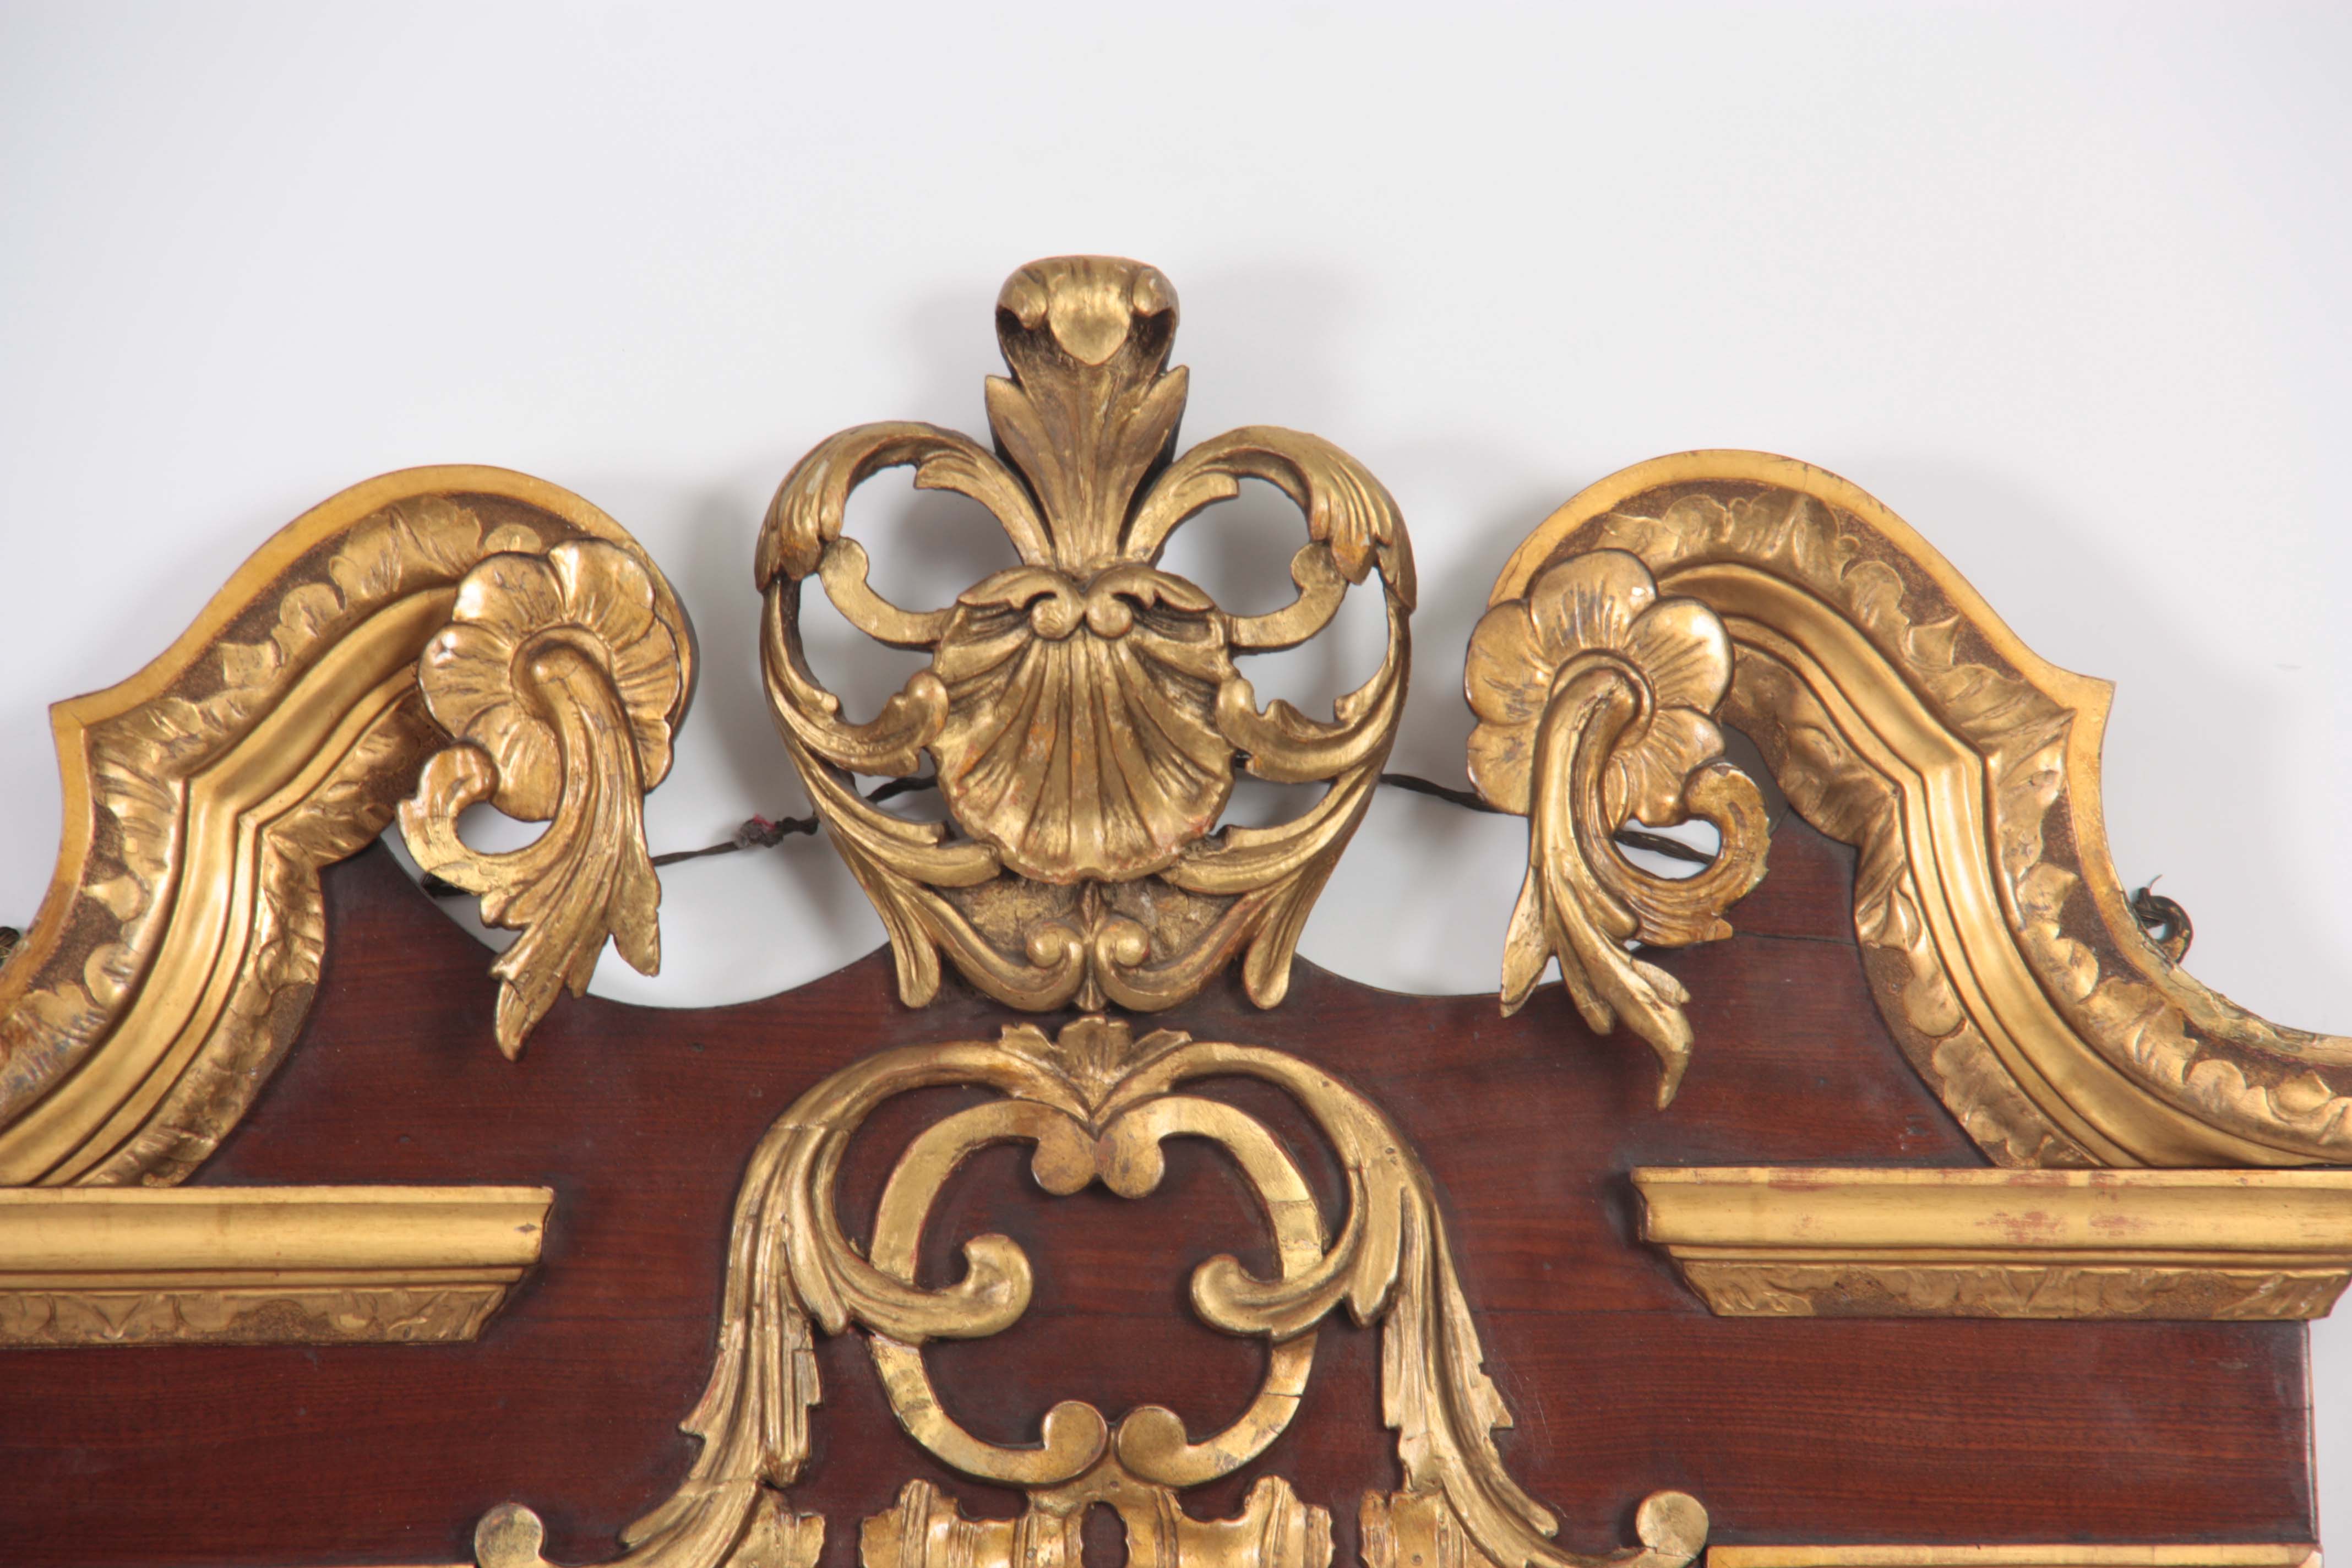 AN 18TH CENTURY MAHOGANY AND PARCEL GILT HANGING MIRROR with elaborate swan neck and shellwork - Image 2 of 5